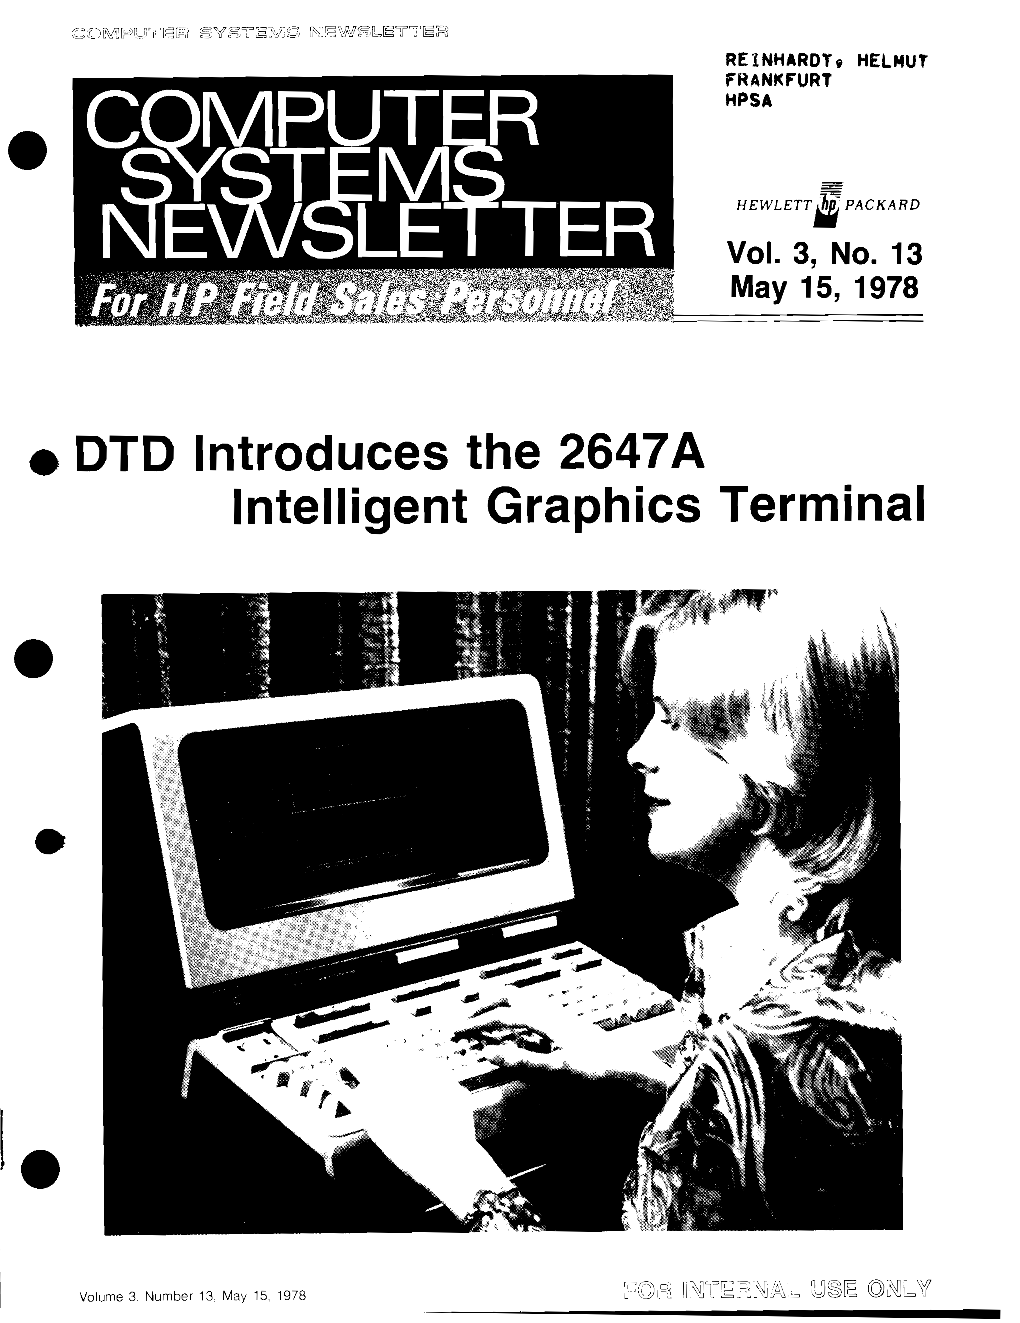 DTD Introduces the 2647A Intelligent Graphics Terminal